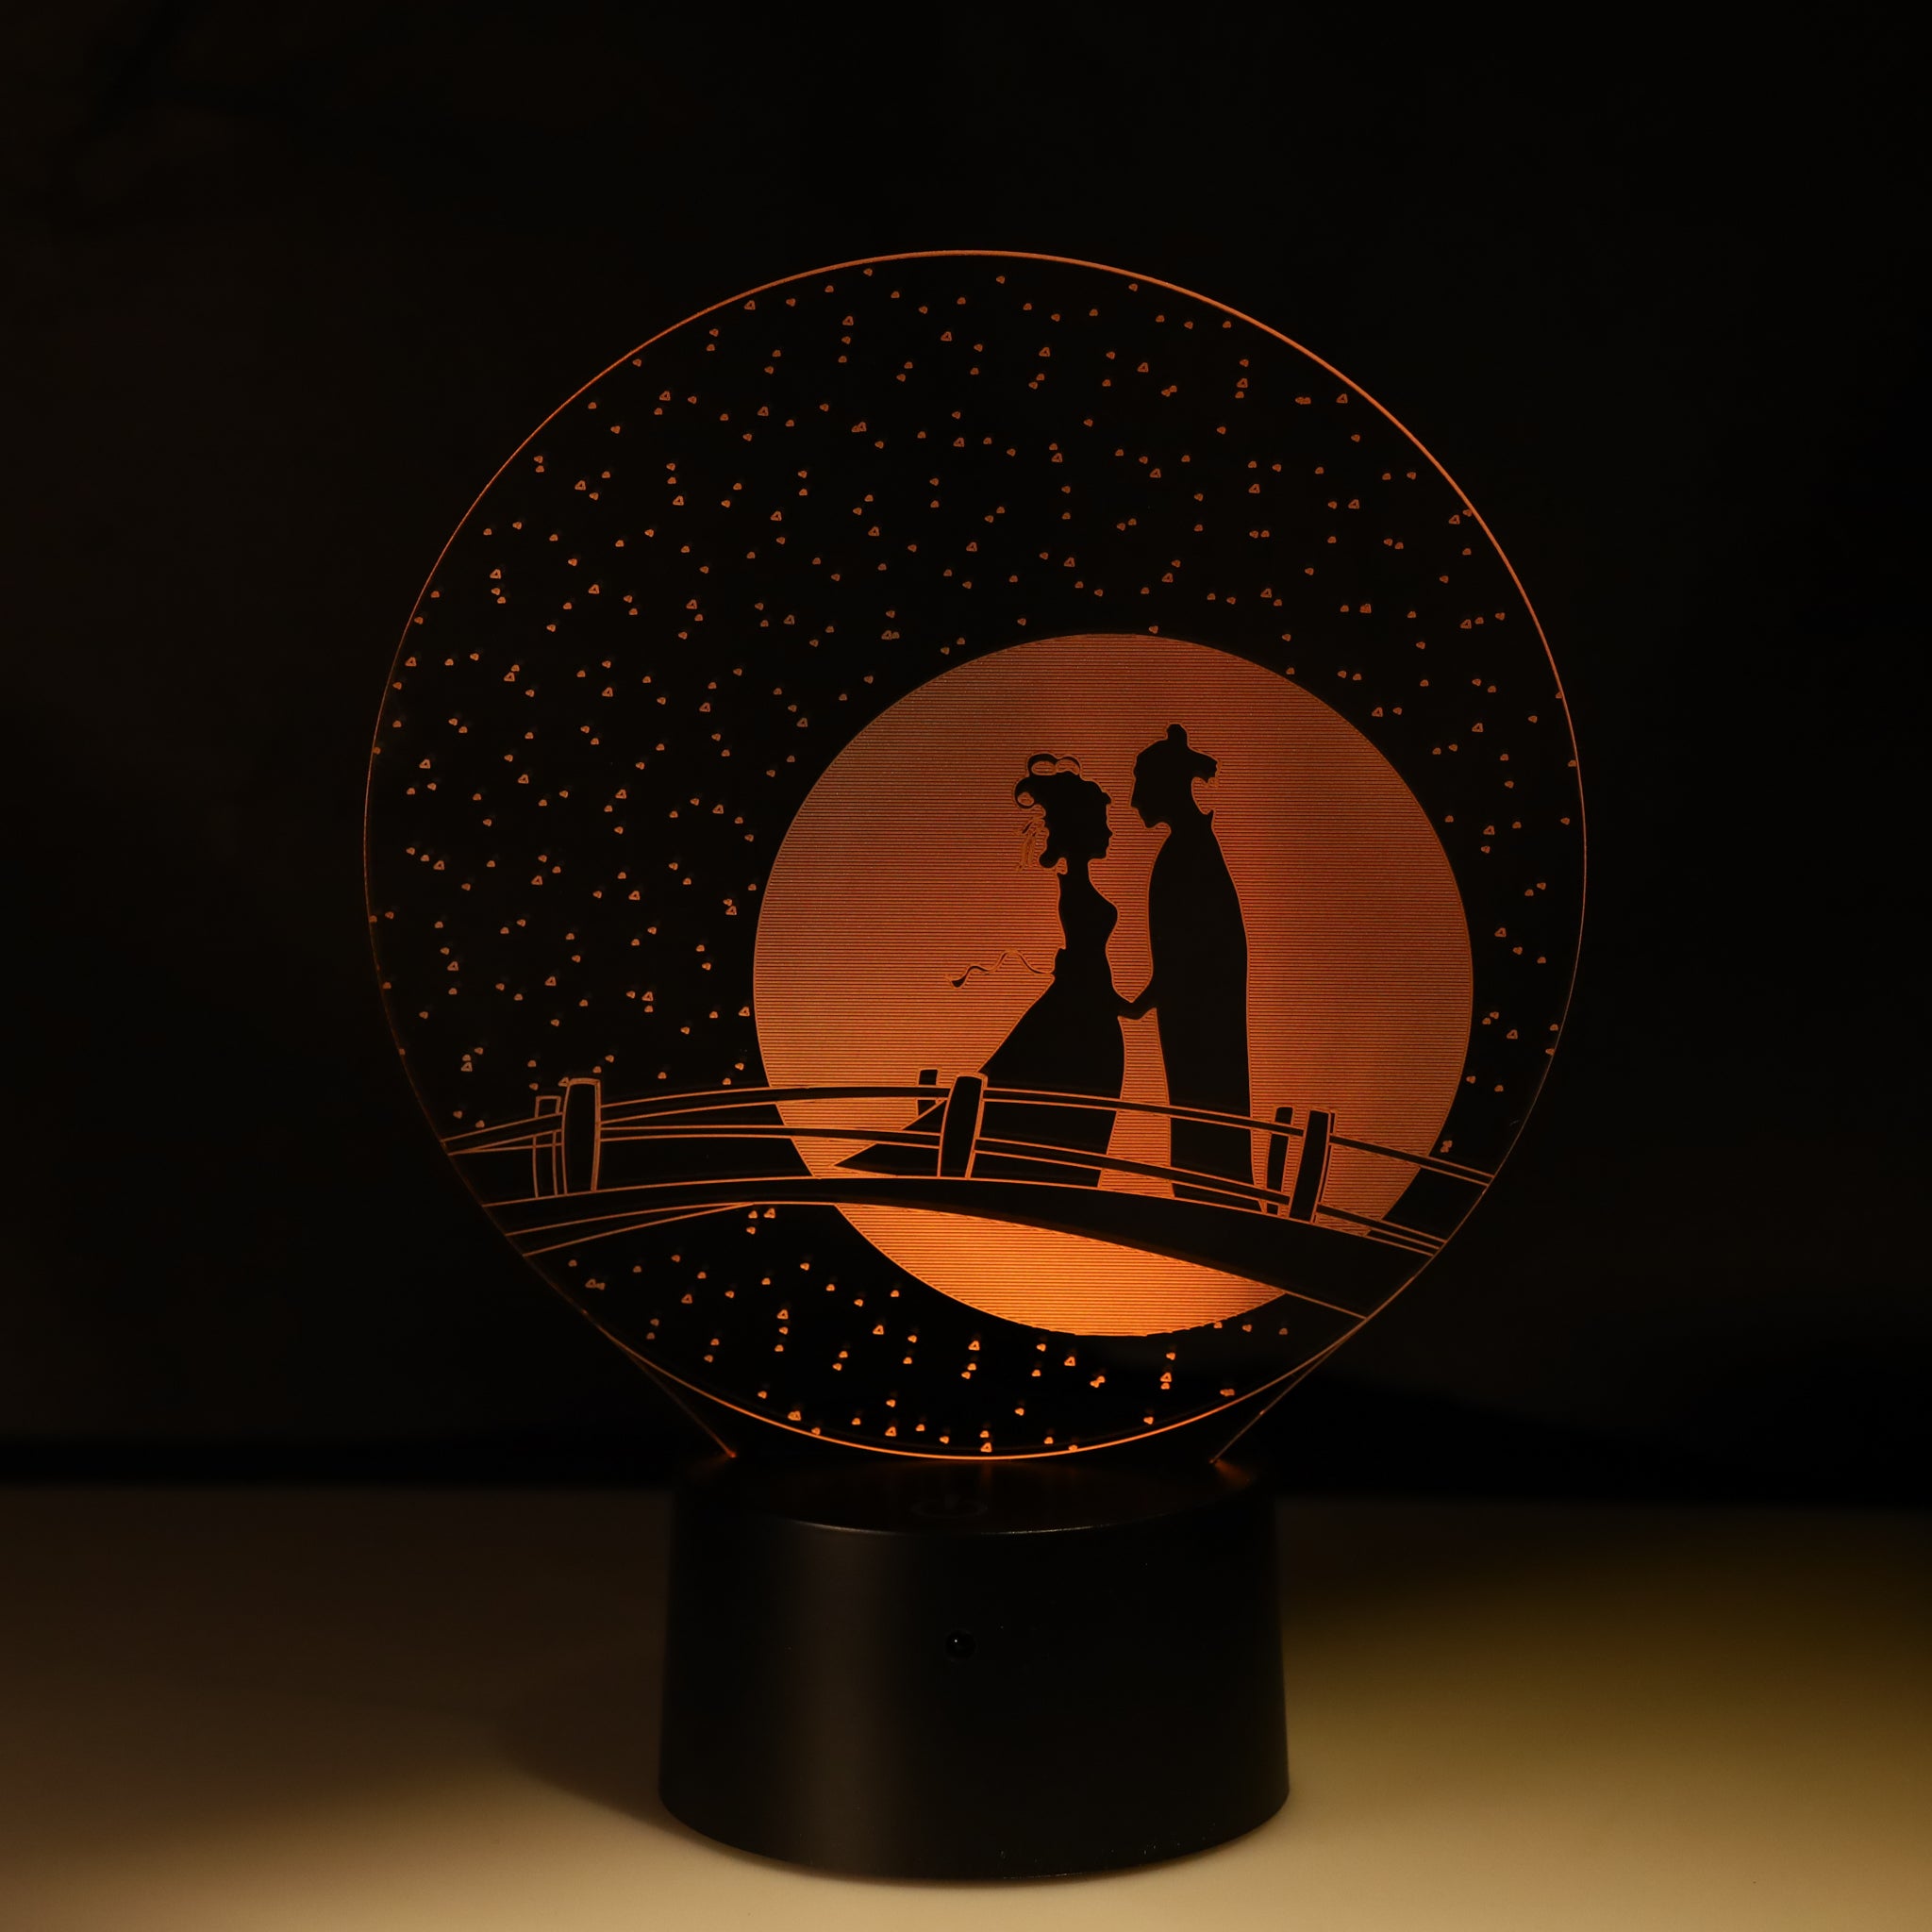 3D Illusion Hologram Couple Romance Lamp QuirkyStore.in